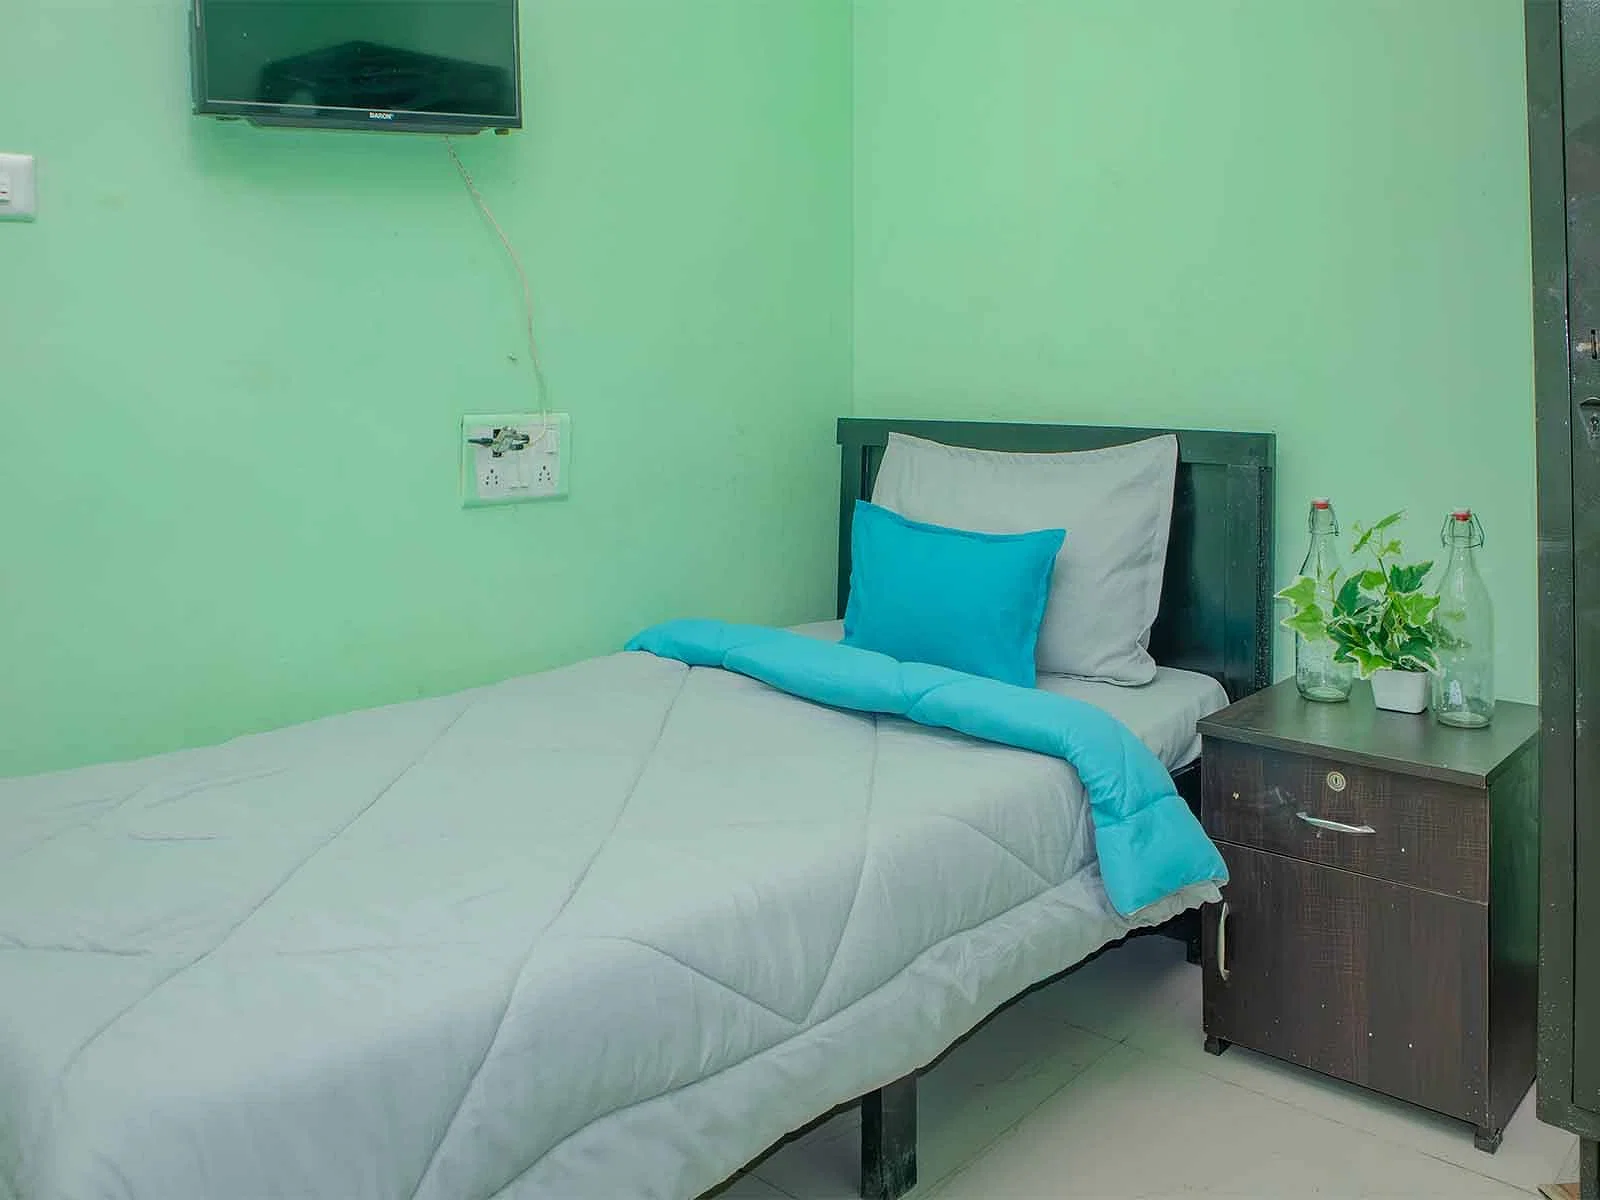 budget-friendly PGs and hostels for men with single rooms with daily hopusekeeping-Zolo Scarlet